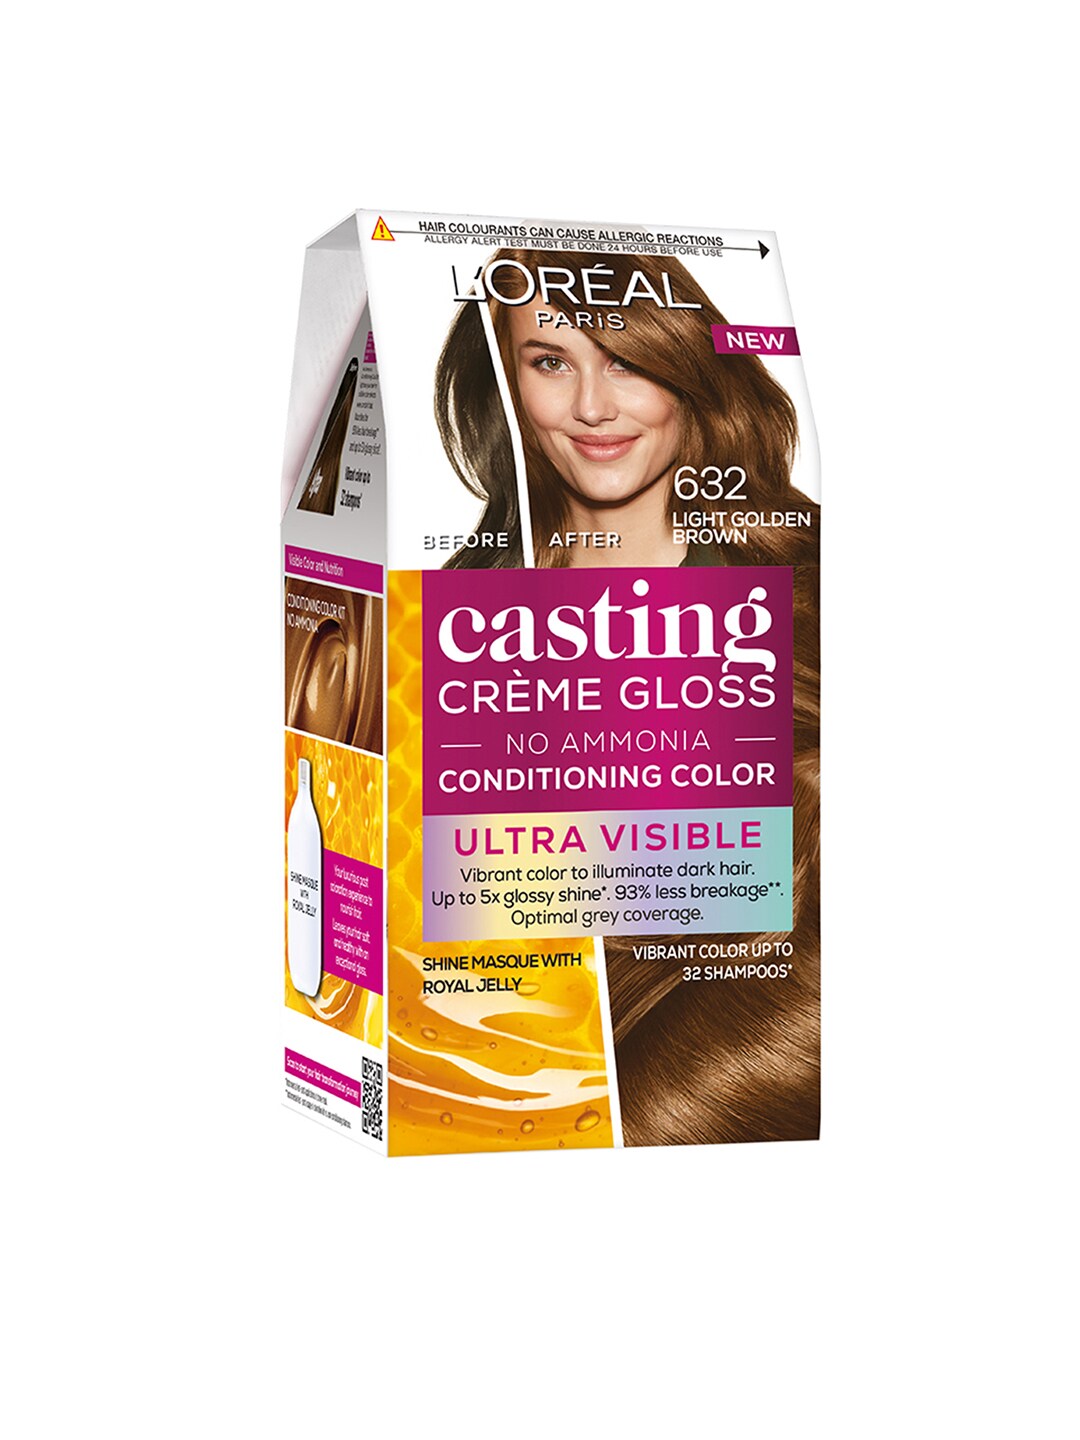 LOreal Paris Casting Creme Gloss Hair Color-Light Golden Brown 632 - 100g + 60ml Price in India